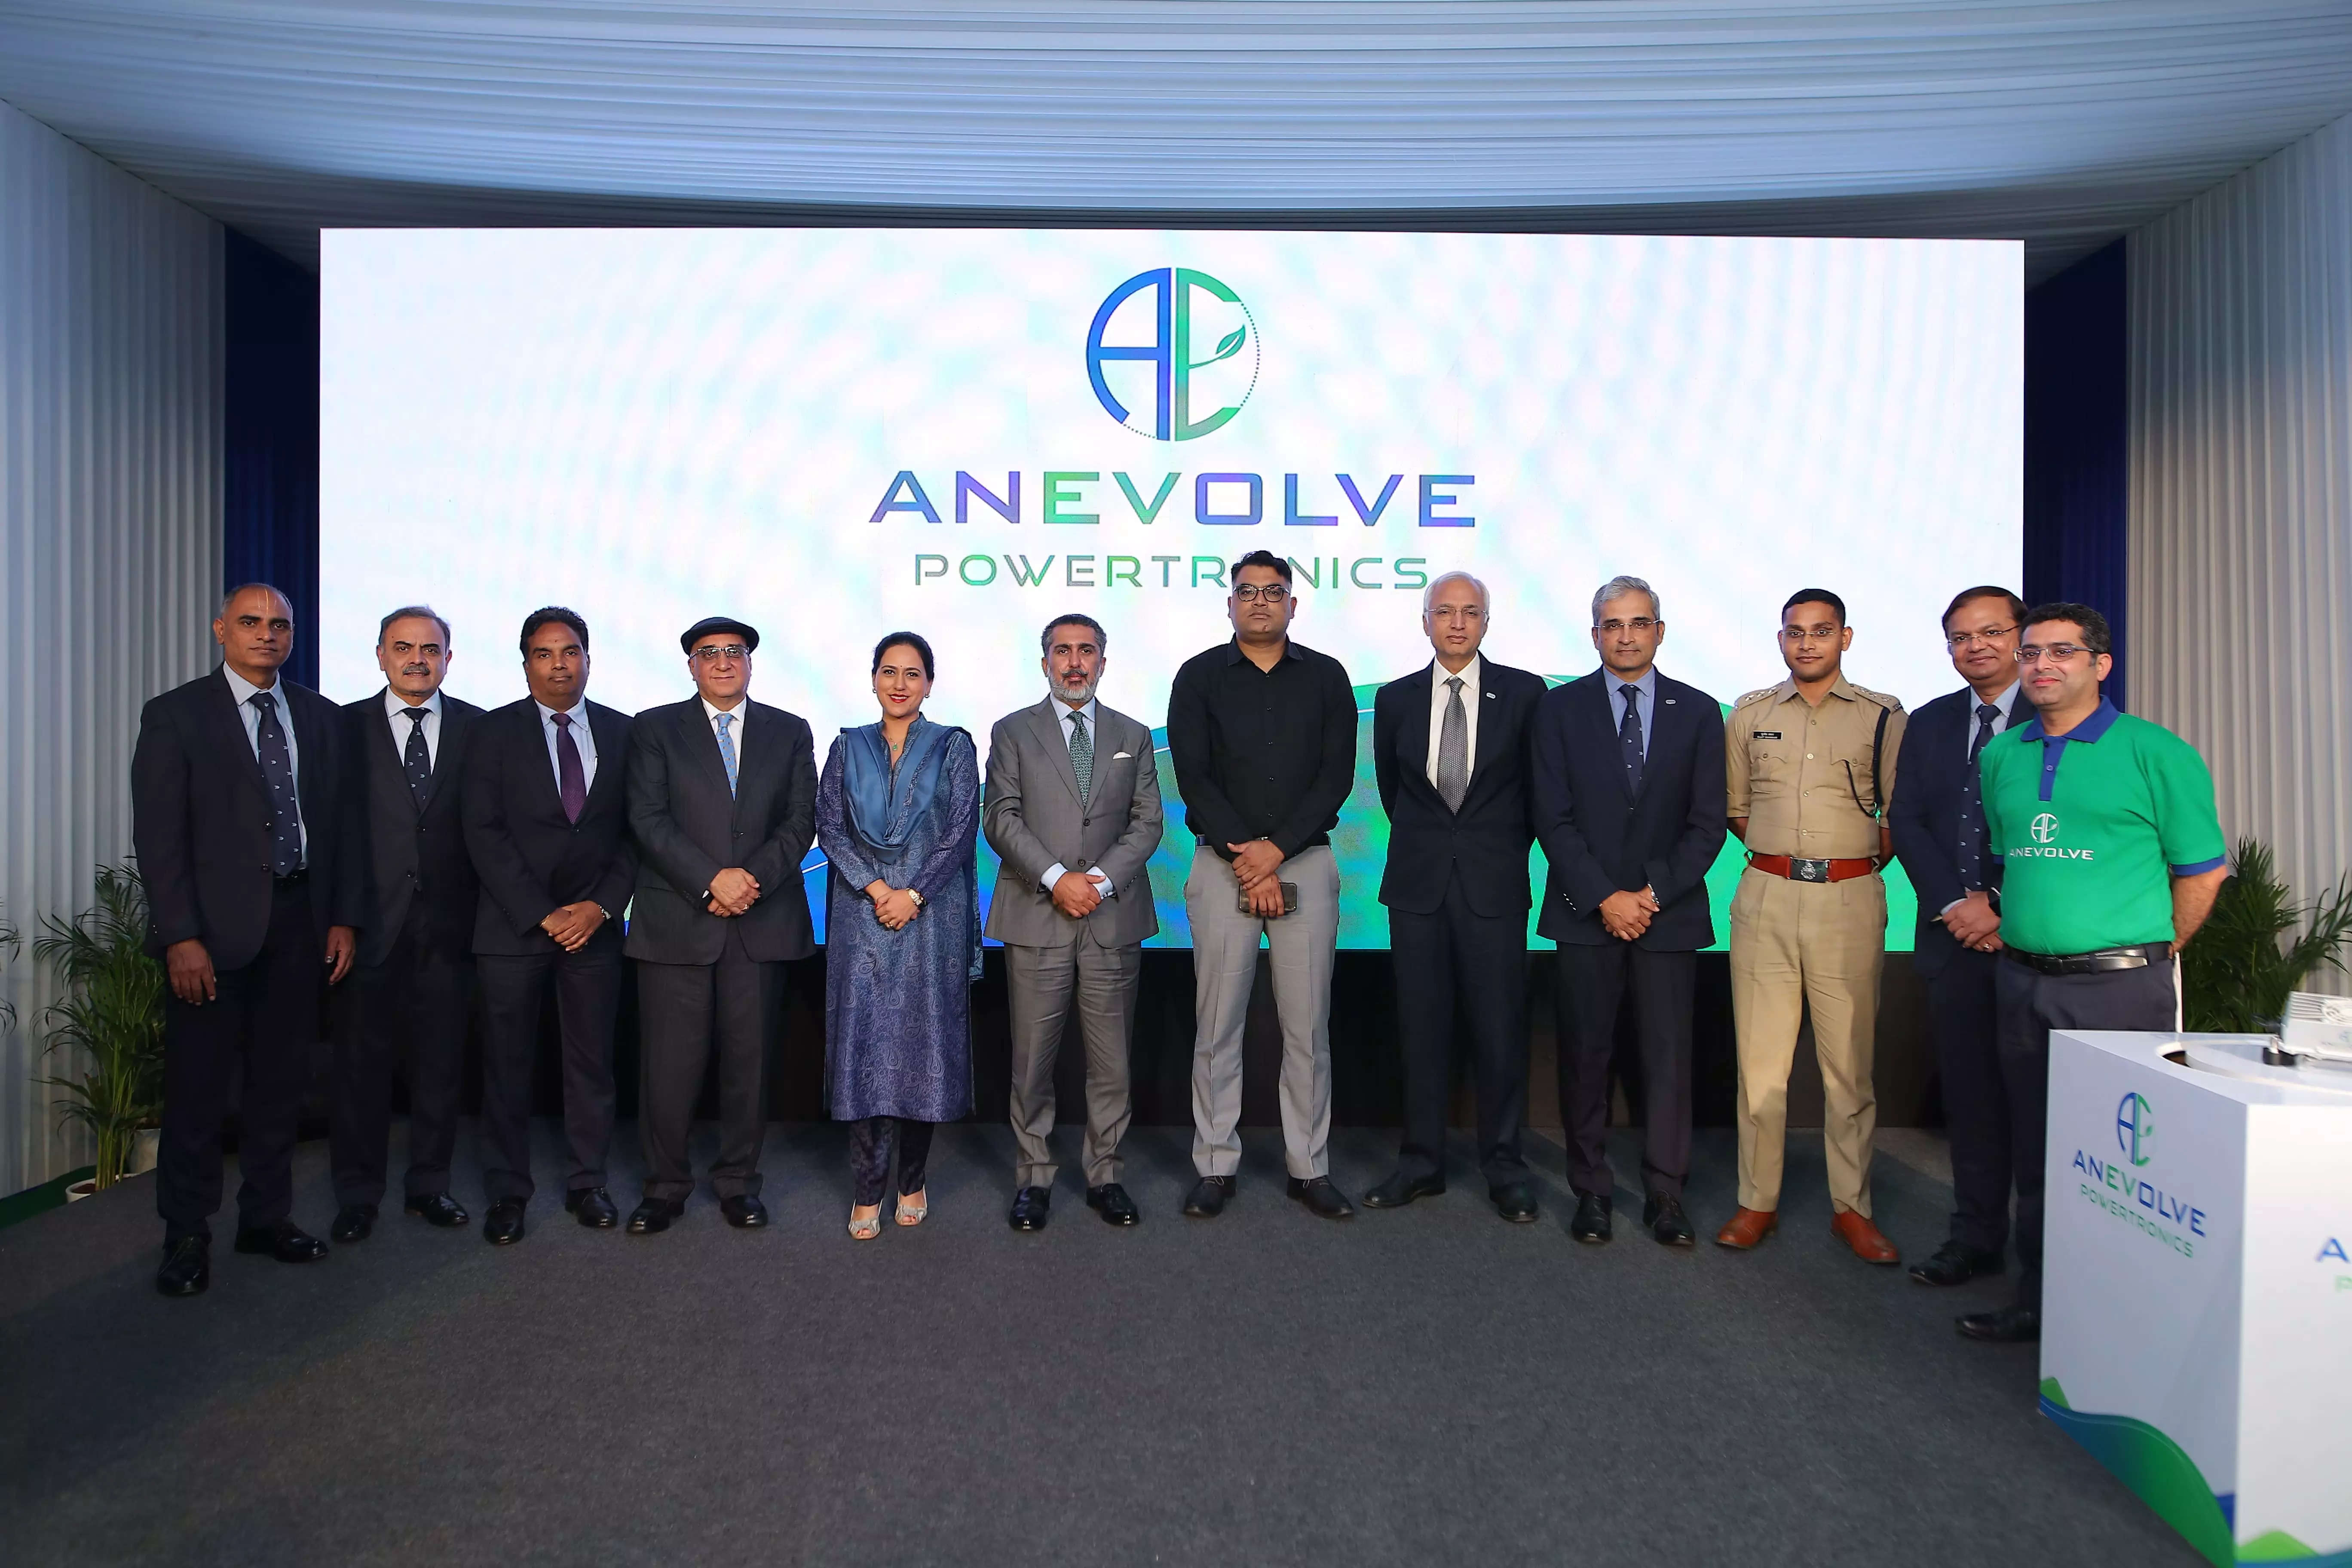 <p>ANEVOLVE will design, create, and manufacture green technologies, systems, and solutions for wide-ranging applications across sectors.</p>